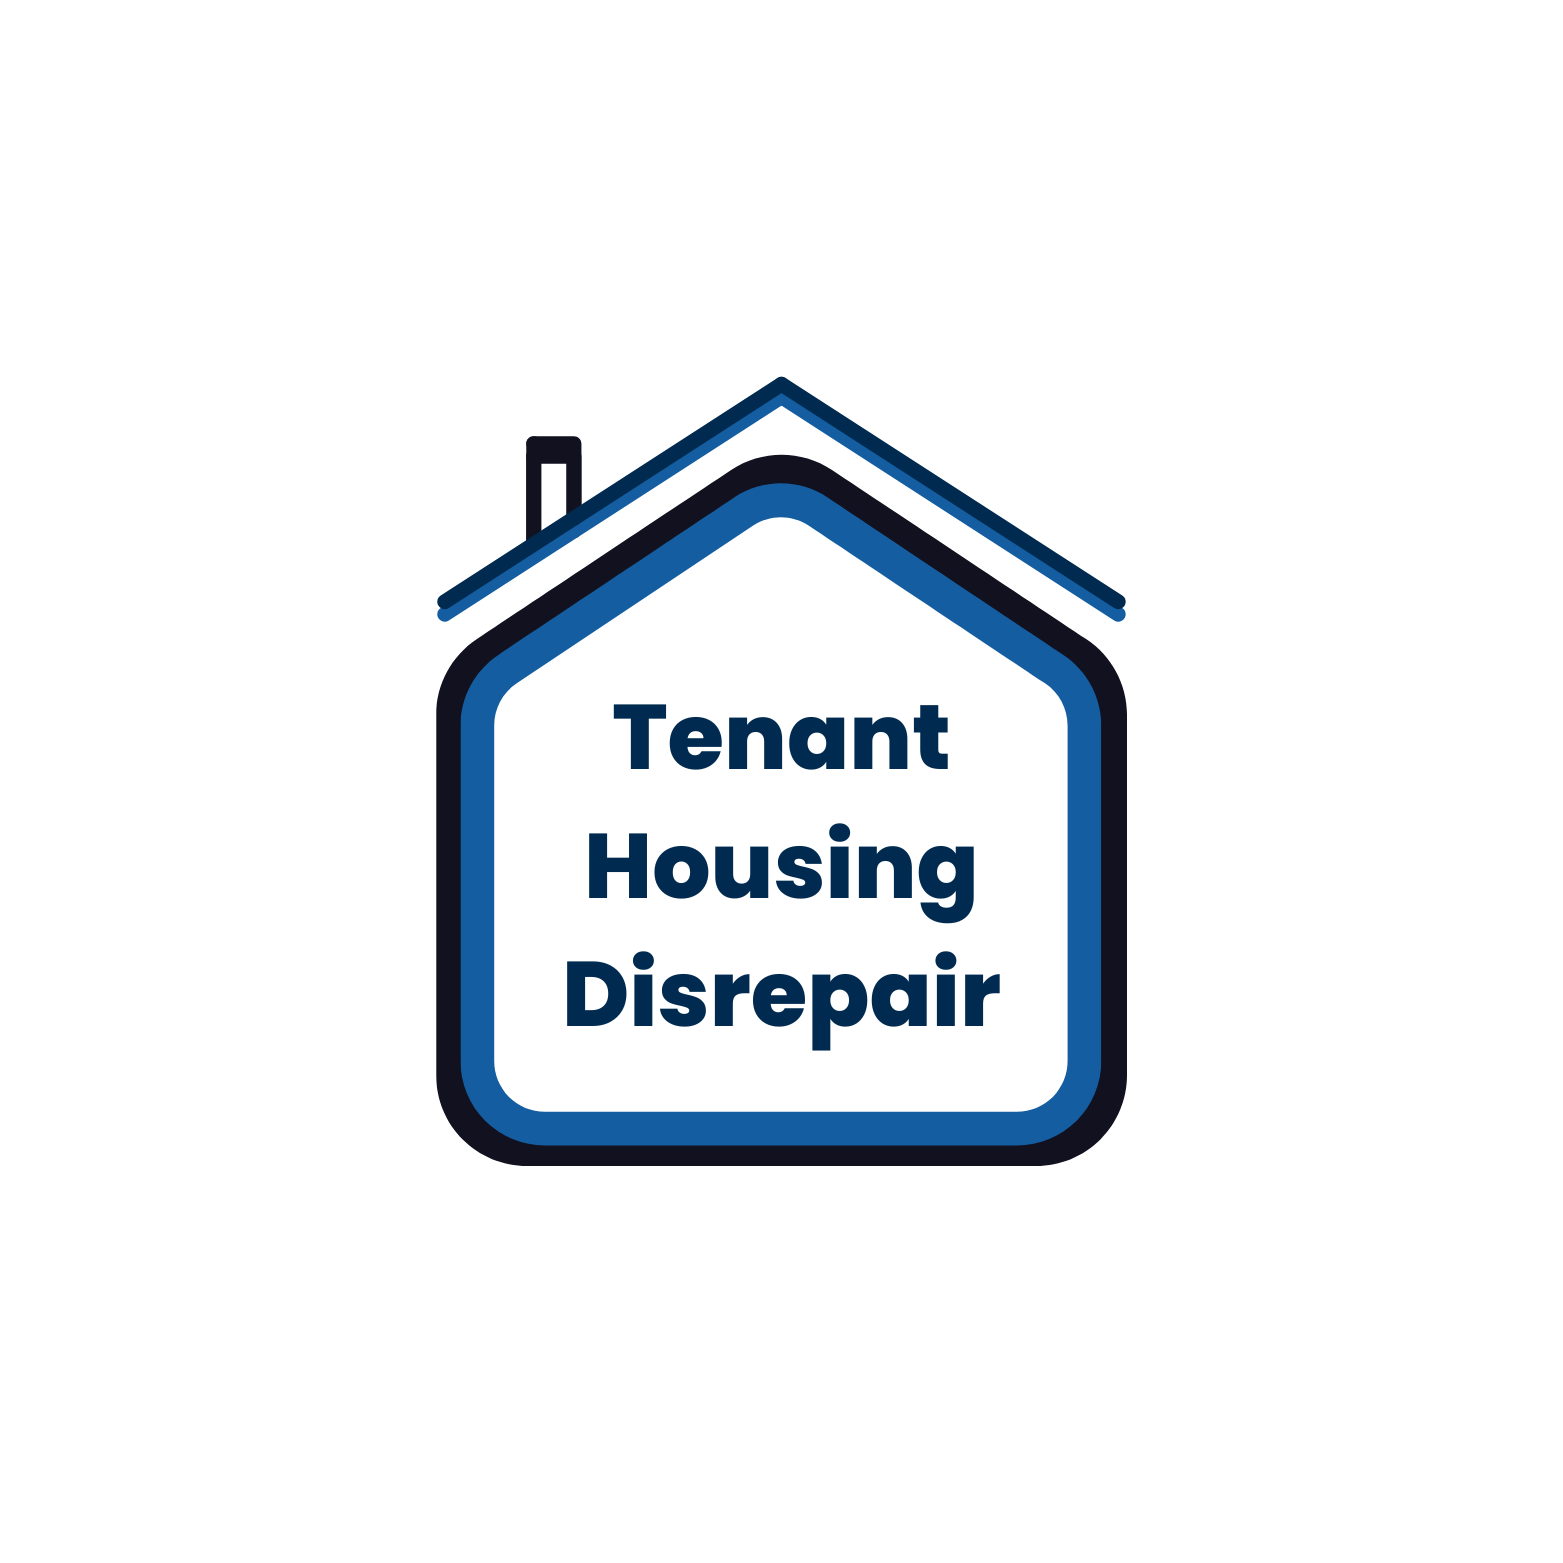 Logo of Tenant Housing Disrepair Lawyers Legal Services In Oldham, Manchester